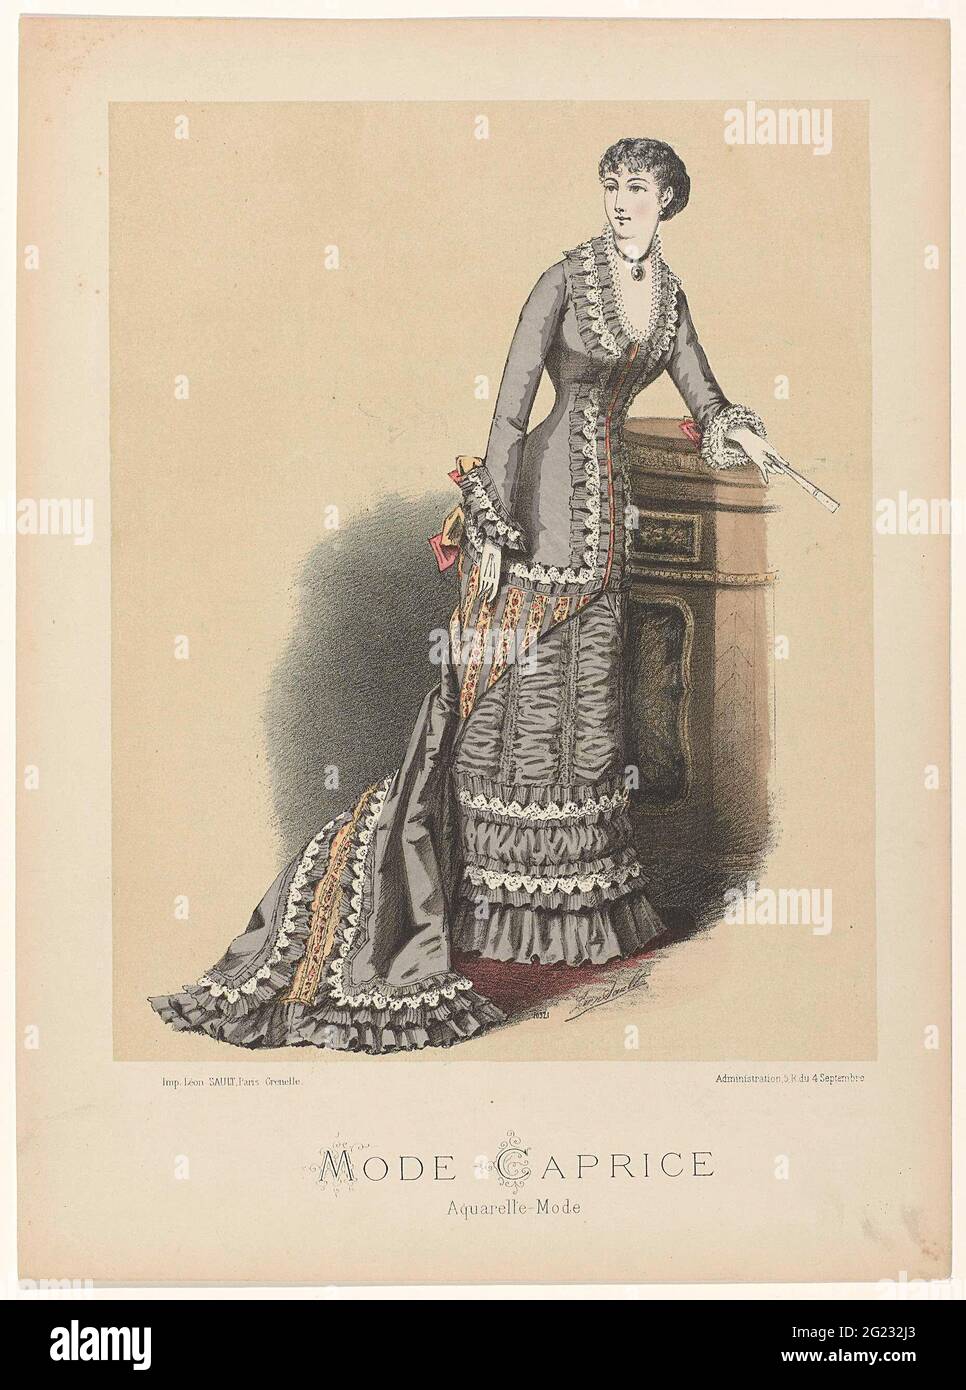 enkel en alleen Interpretatief satelliet Fashion Caprice, 1886 No. 10321: Aquarelle mode. Woman in a richly  decorated dress with trail. Accessories: necklace with pendant, gloves,  impeller Stock Photo - Alamy